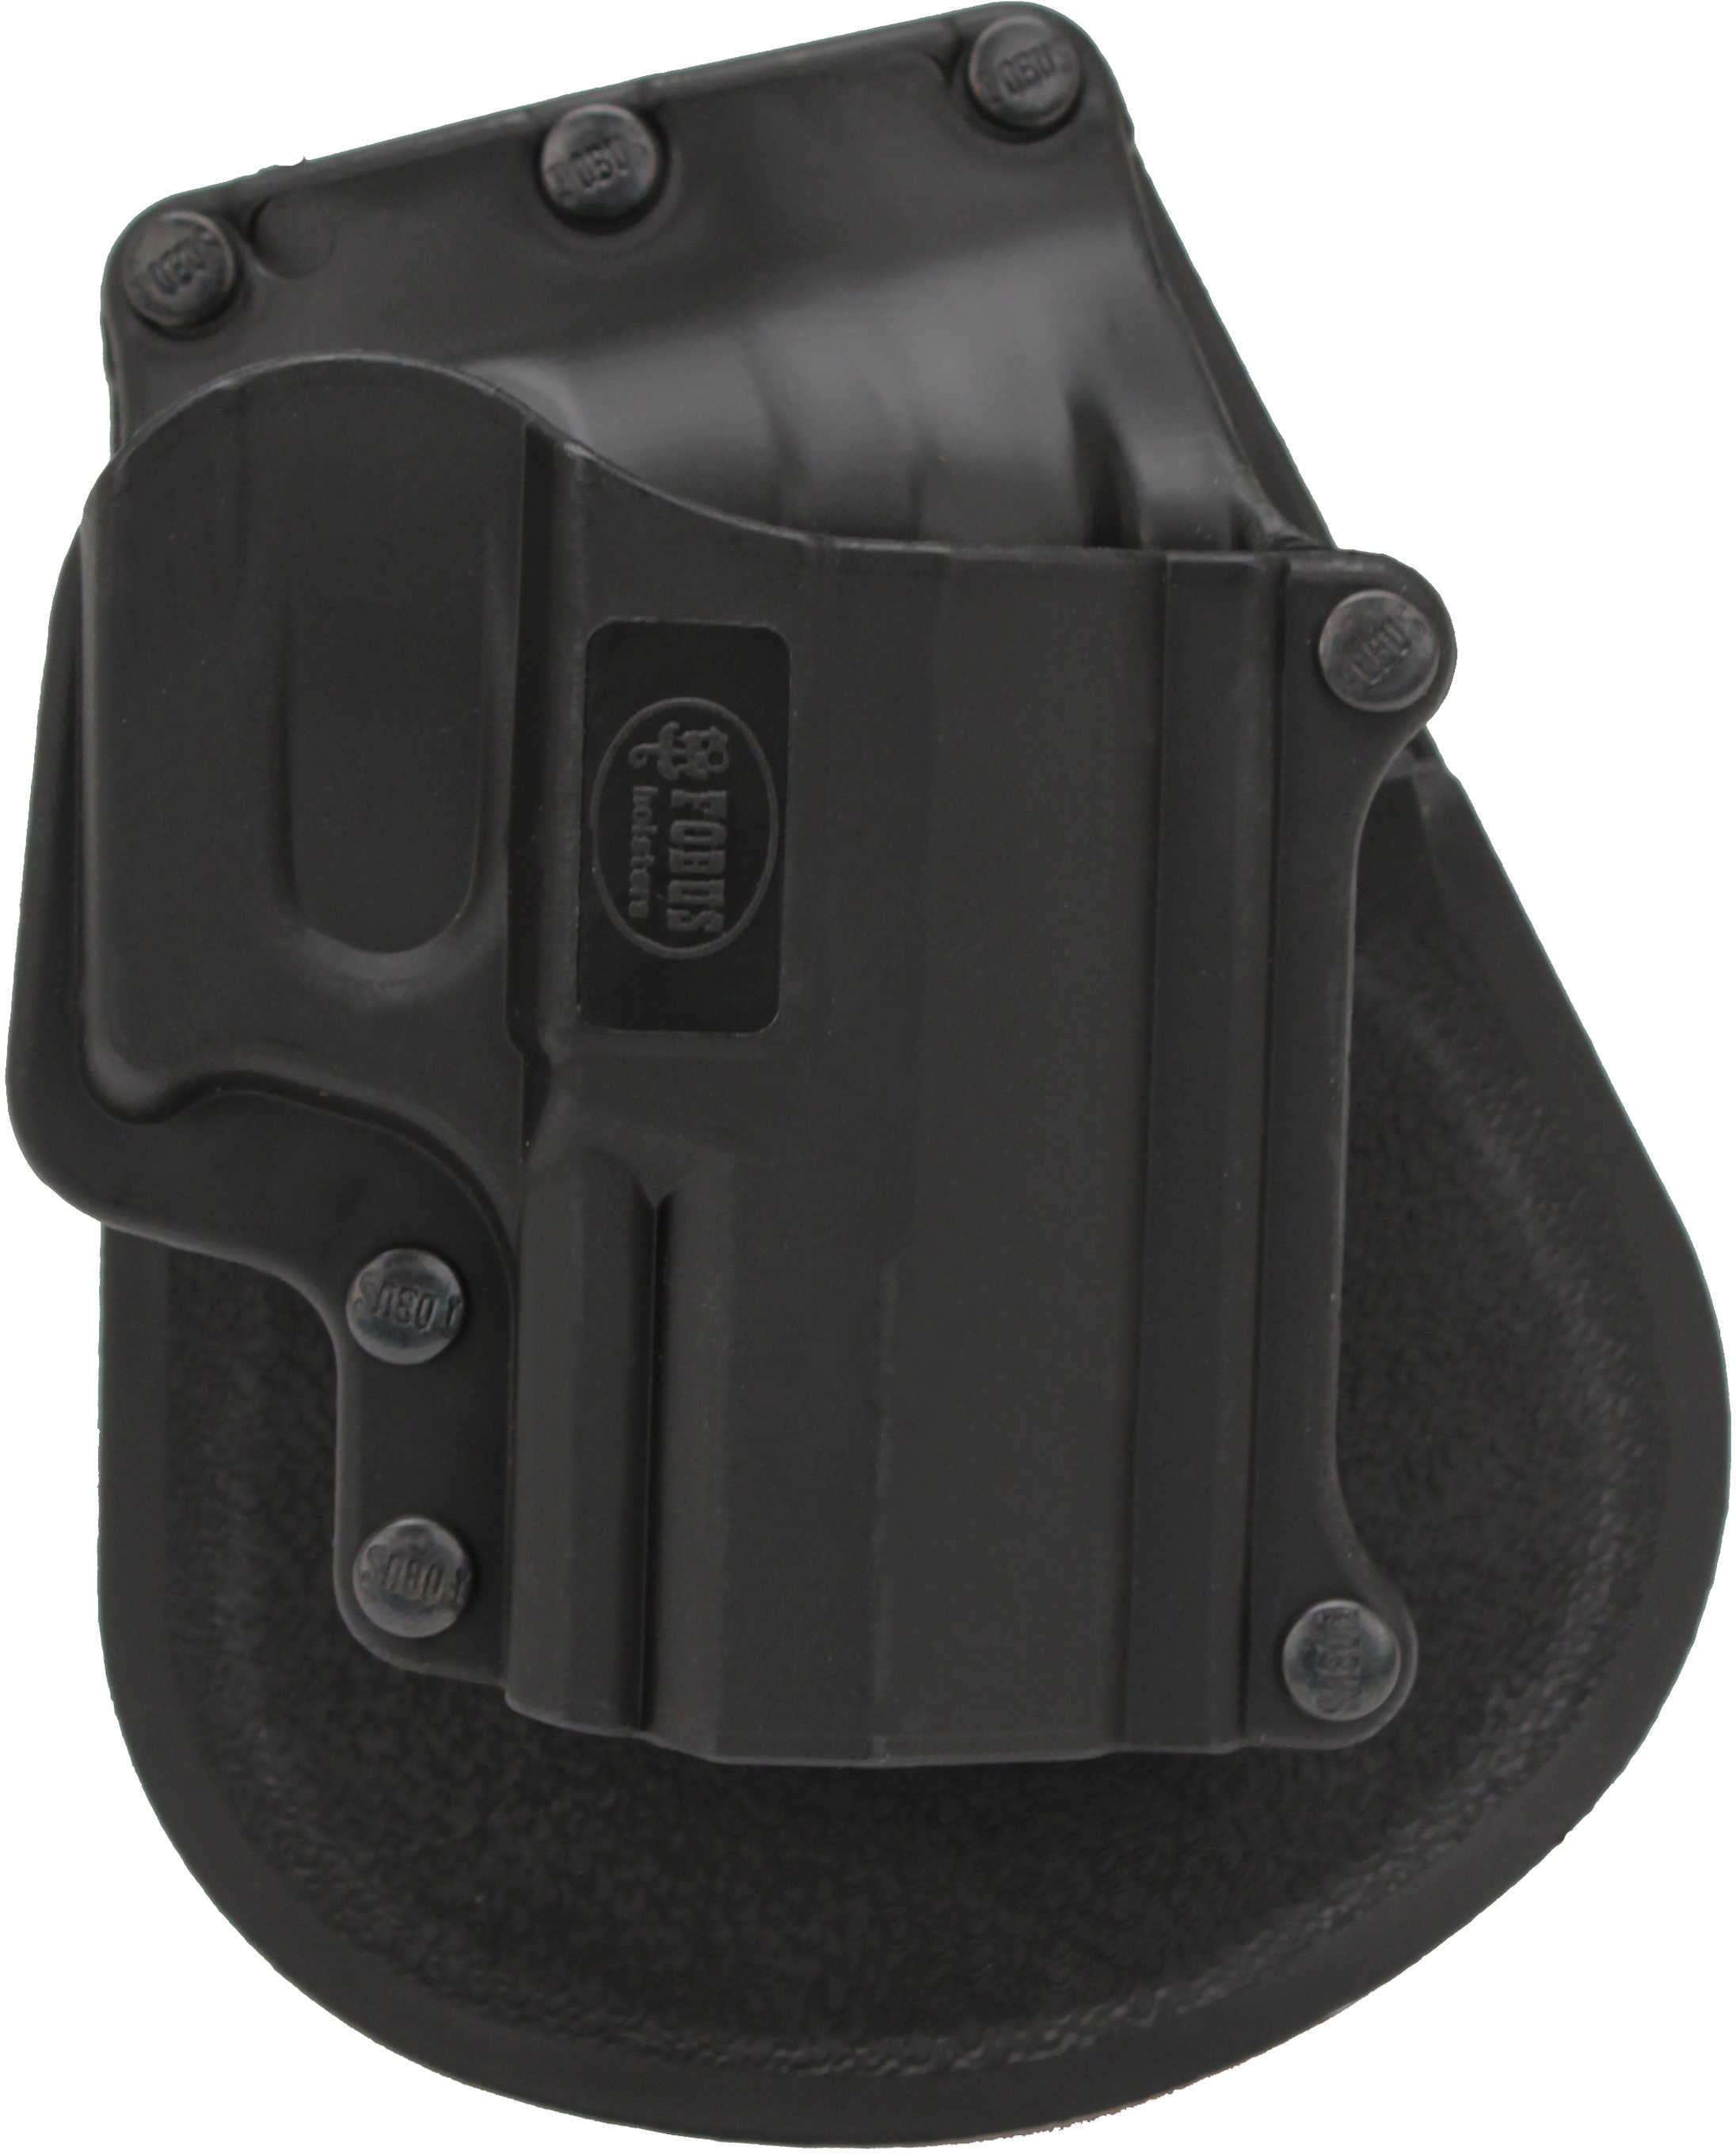 Fobus Standard High Ride Holster With Paddle Attachment Md: Wp22